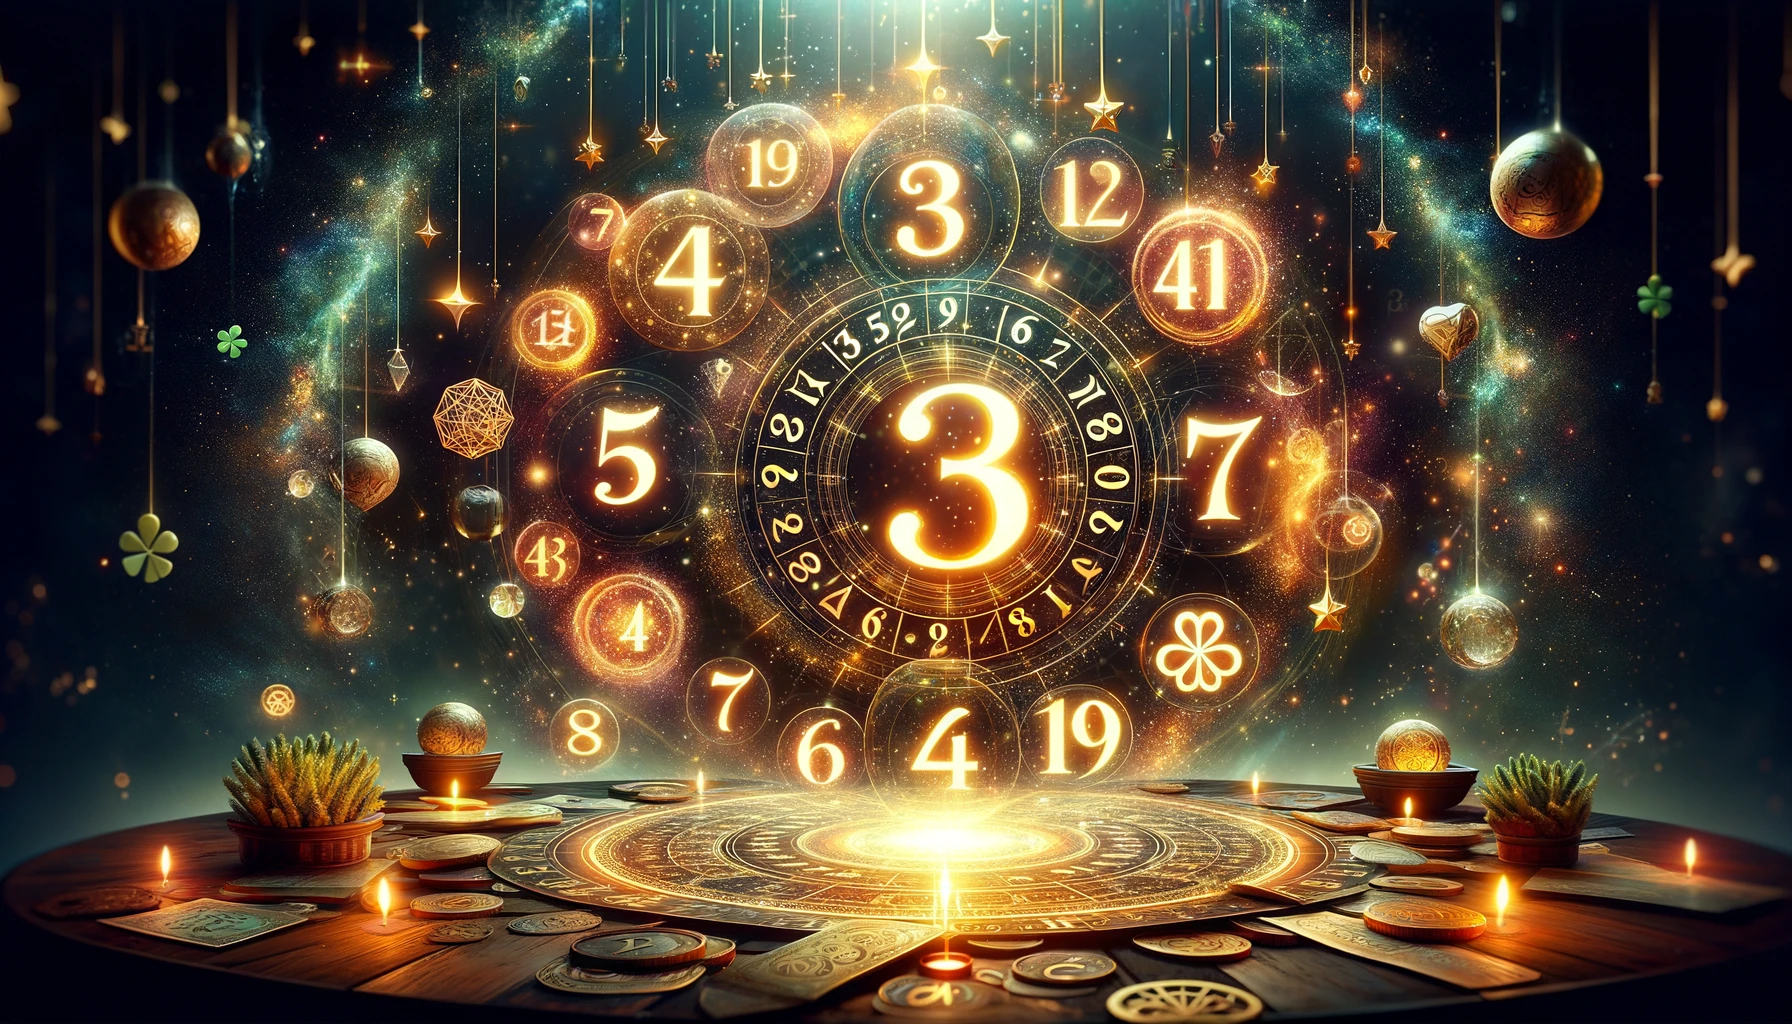 What is a Good Numerology Number?